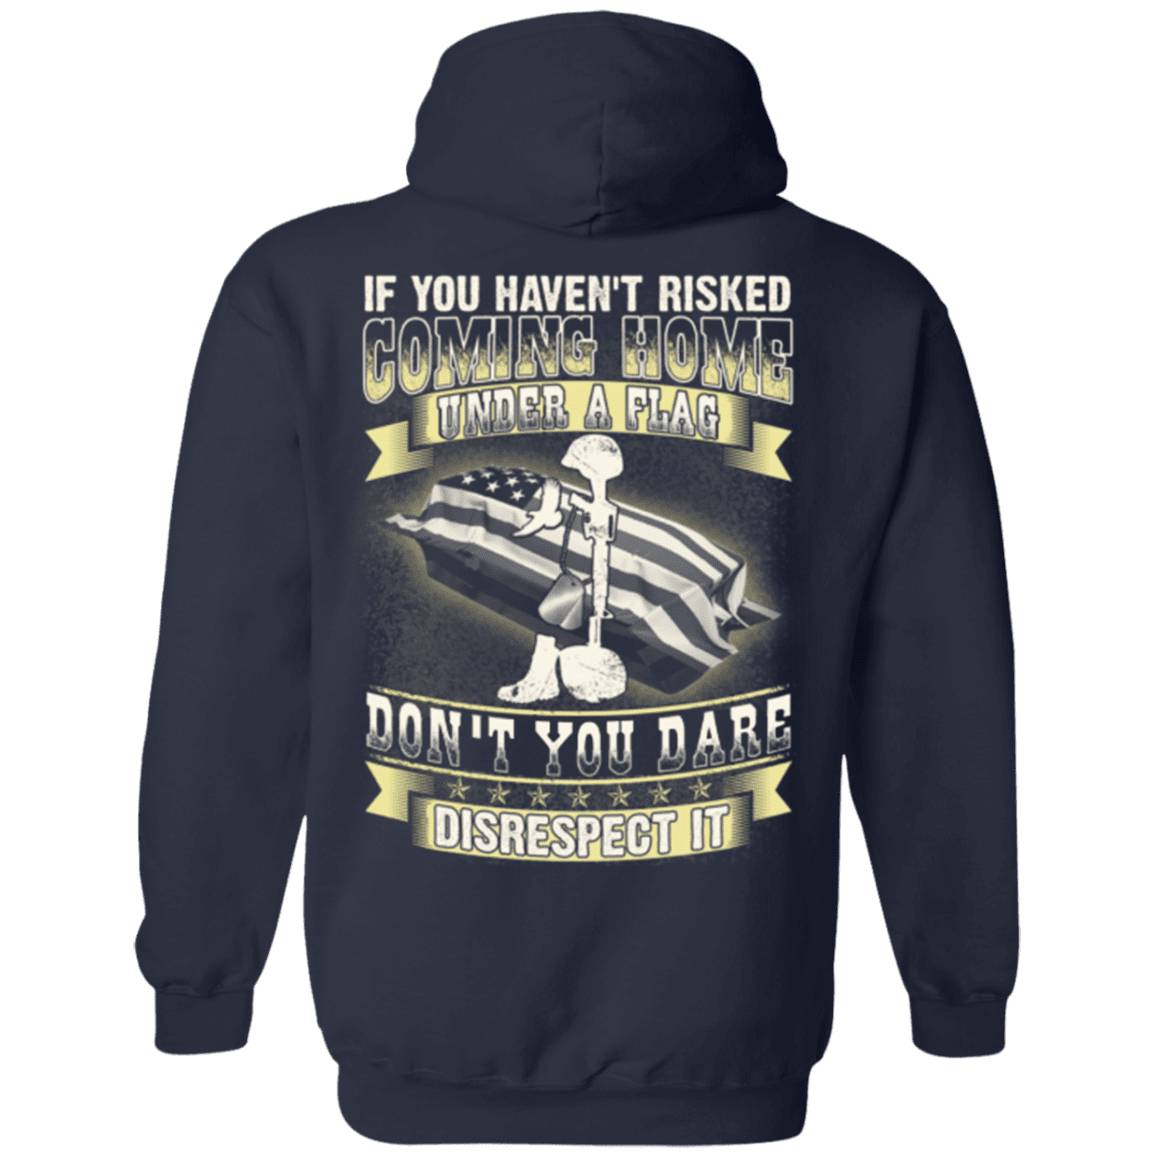 Military T-Shirt "Coming Home Under Flag Don't You Dare Disrespect It"-TShirt-General-Veterans Nation